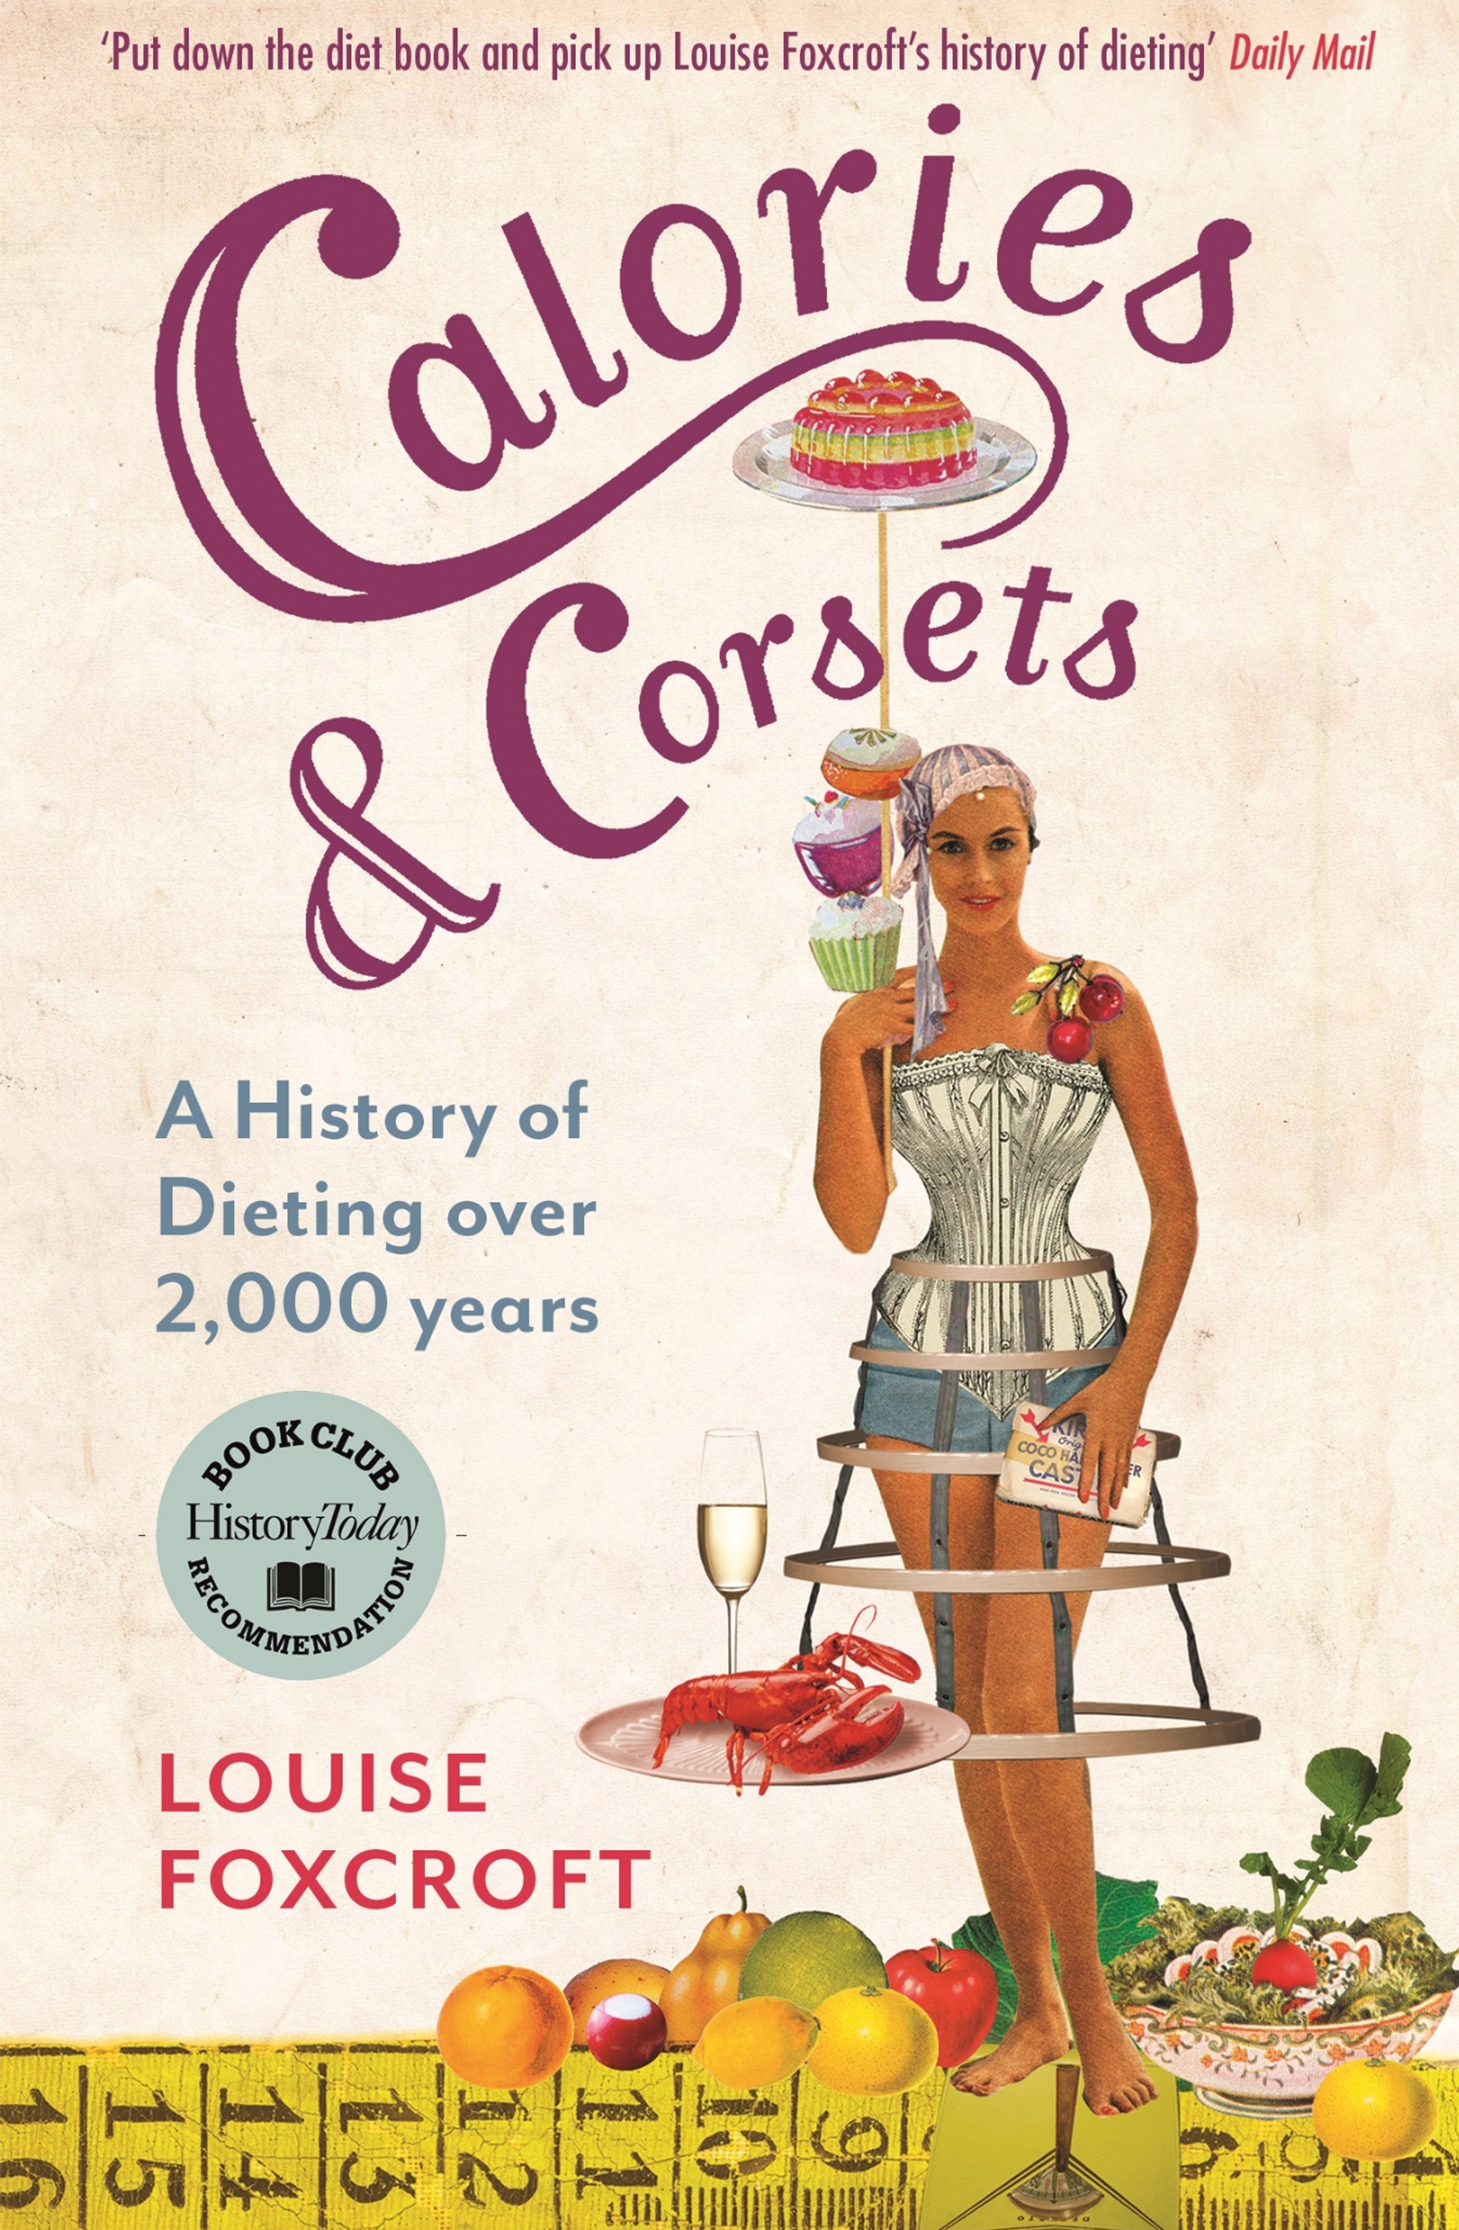 b1-calories-and-corsets-cover.jpg